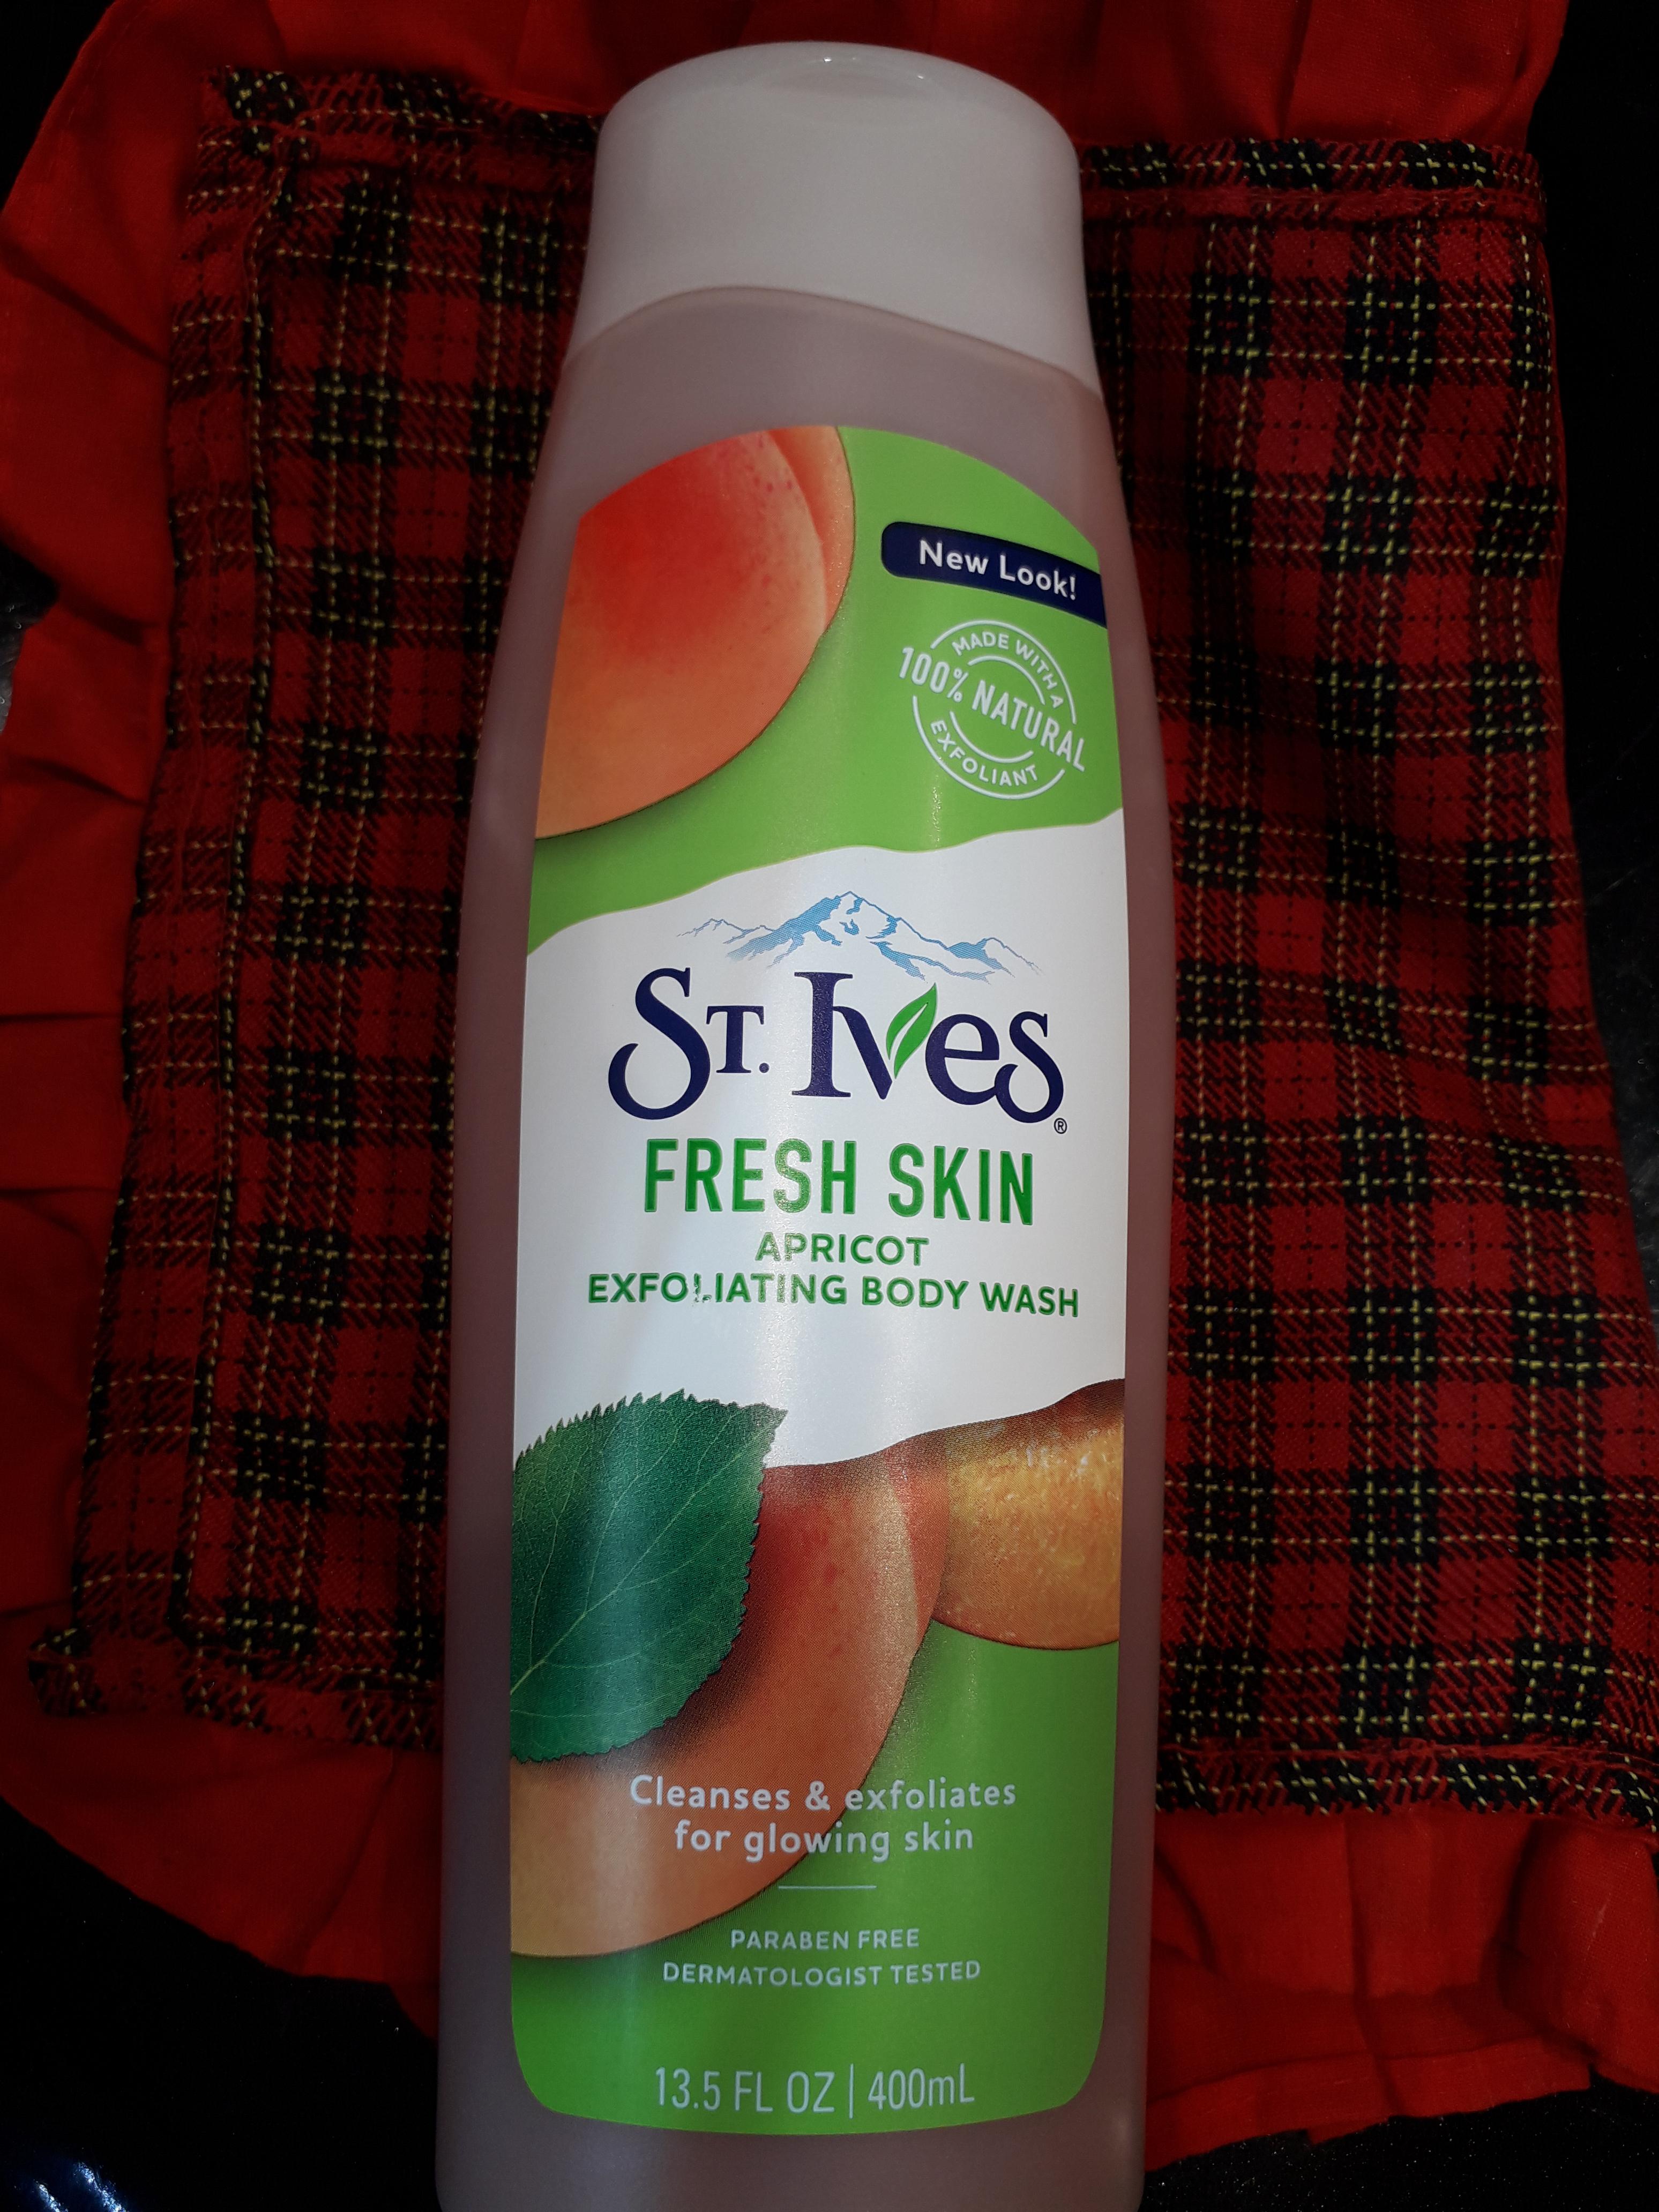 Apricot exfoliating body wash by St. ives : review - Bath & shower 